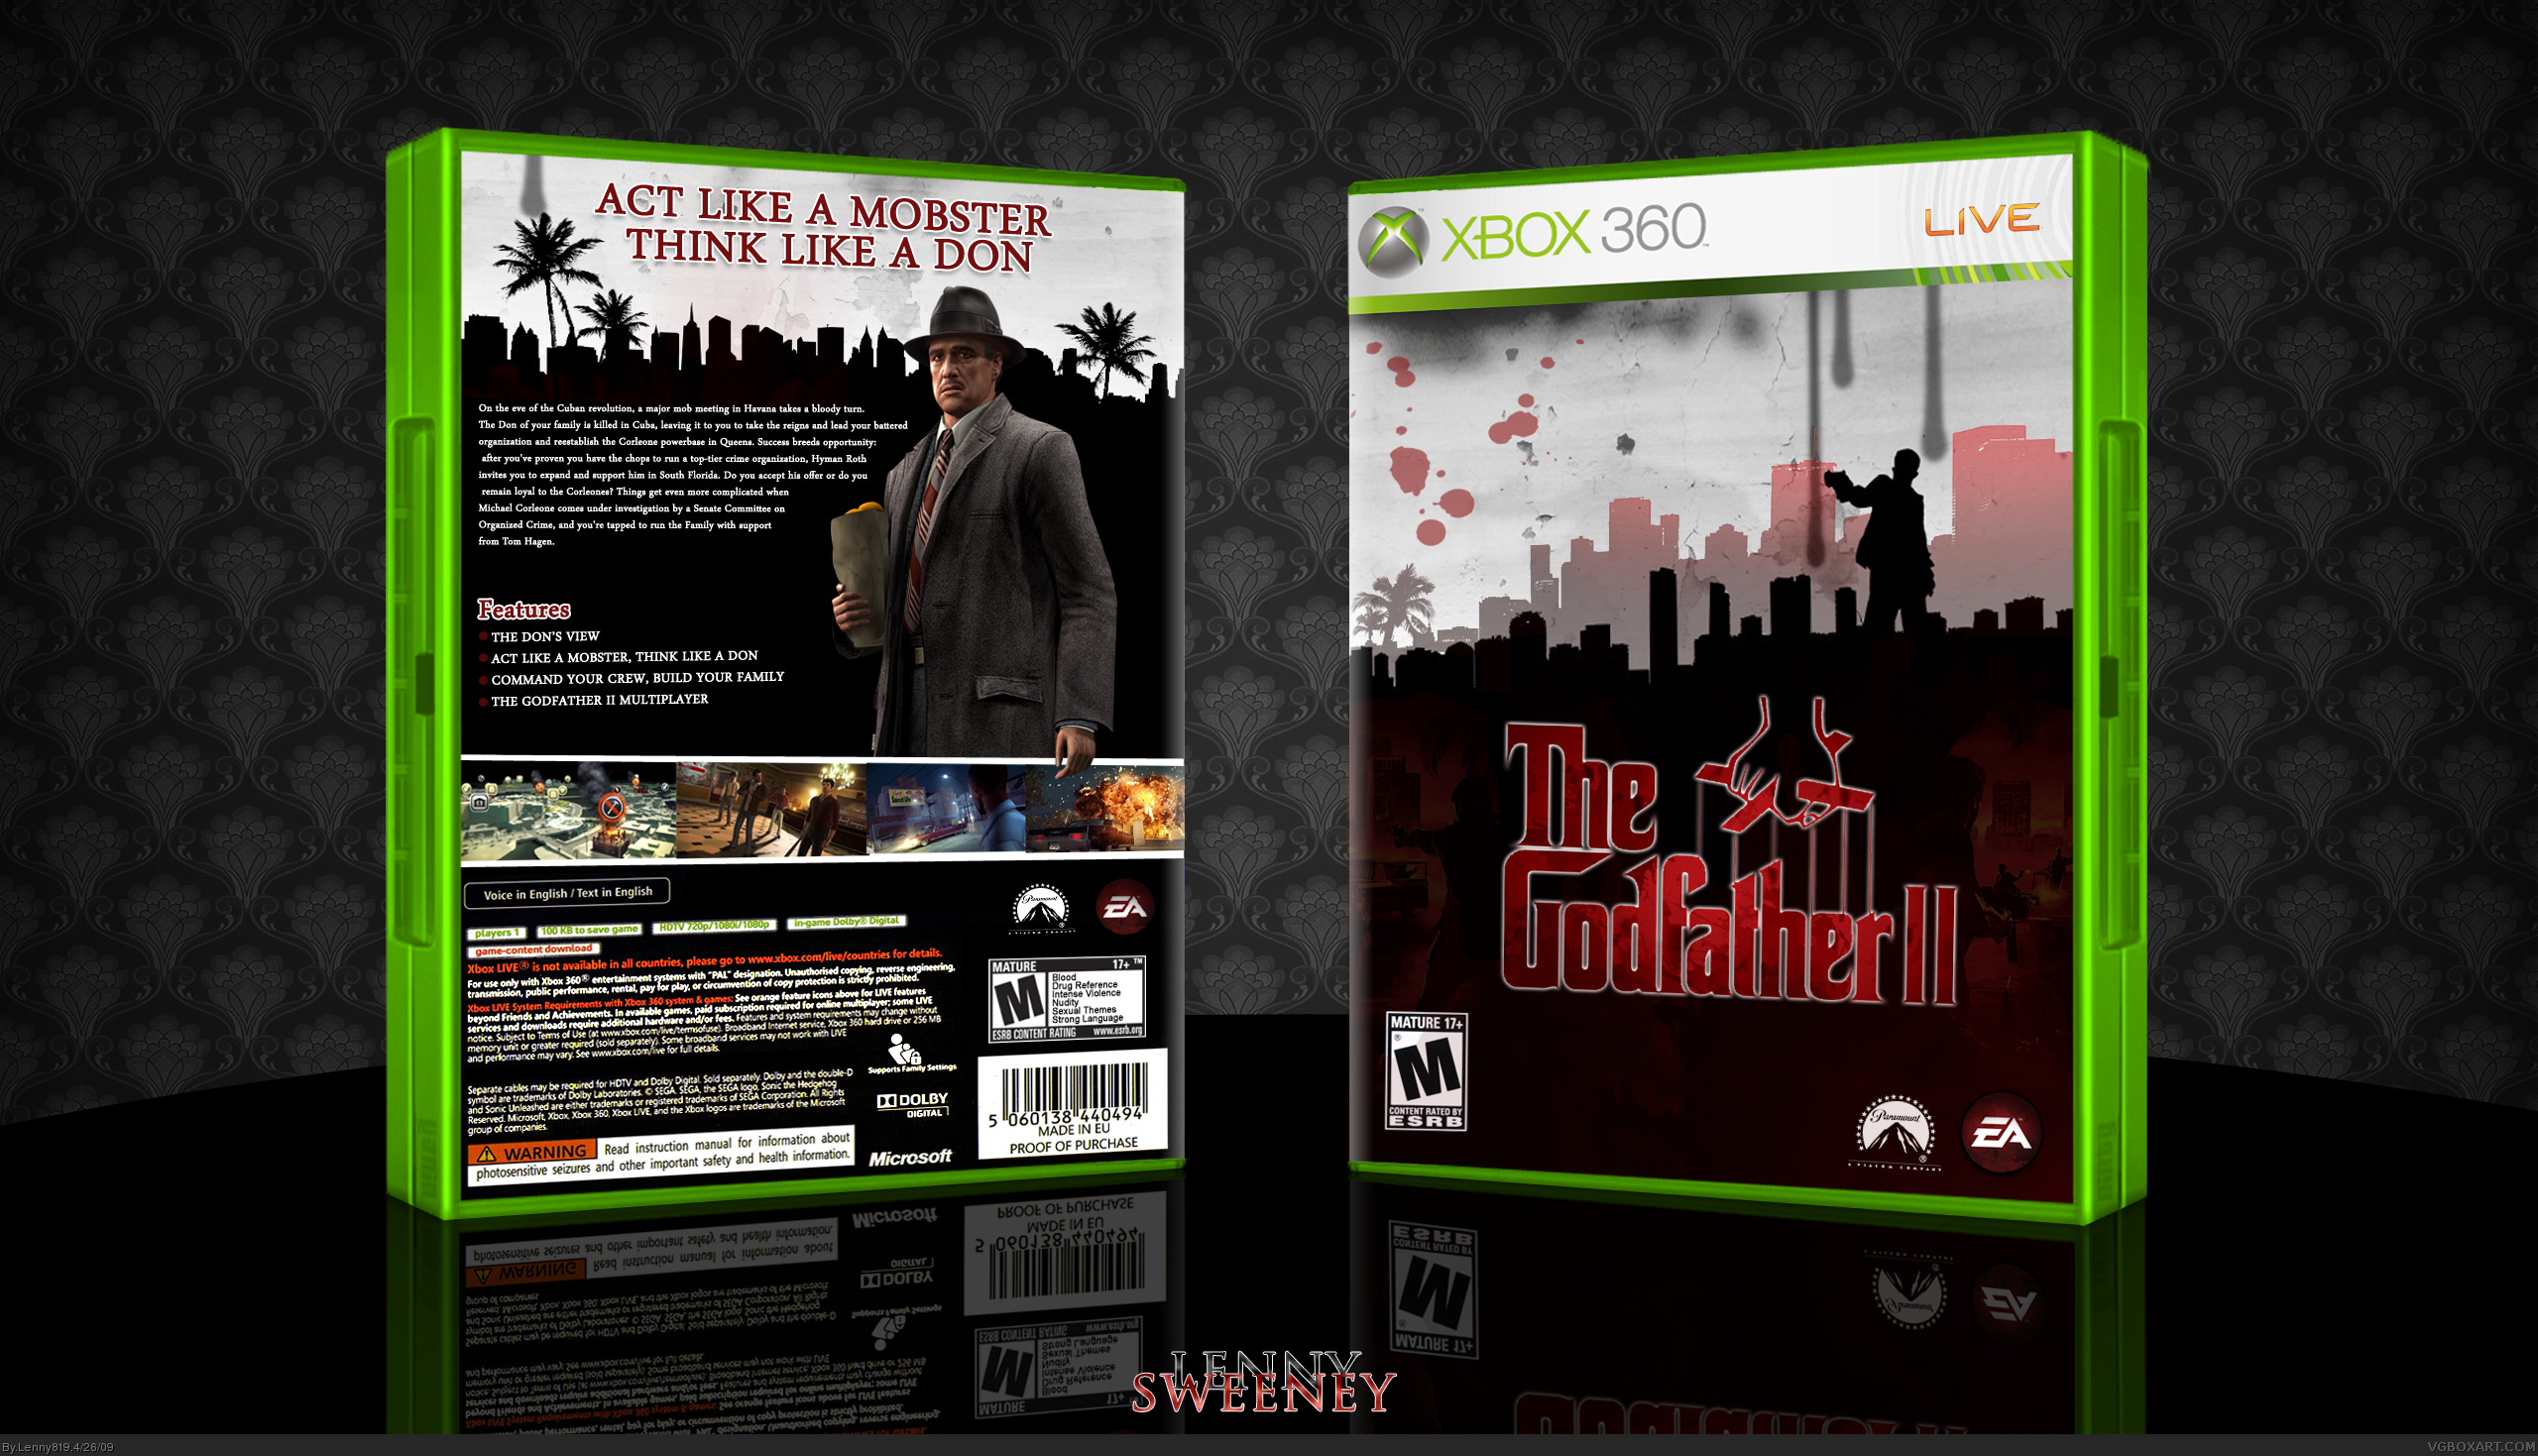 The Godfather II box cover